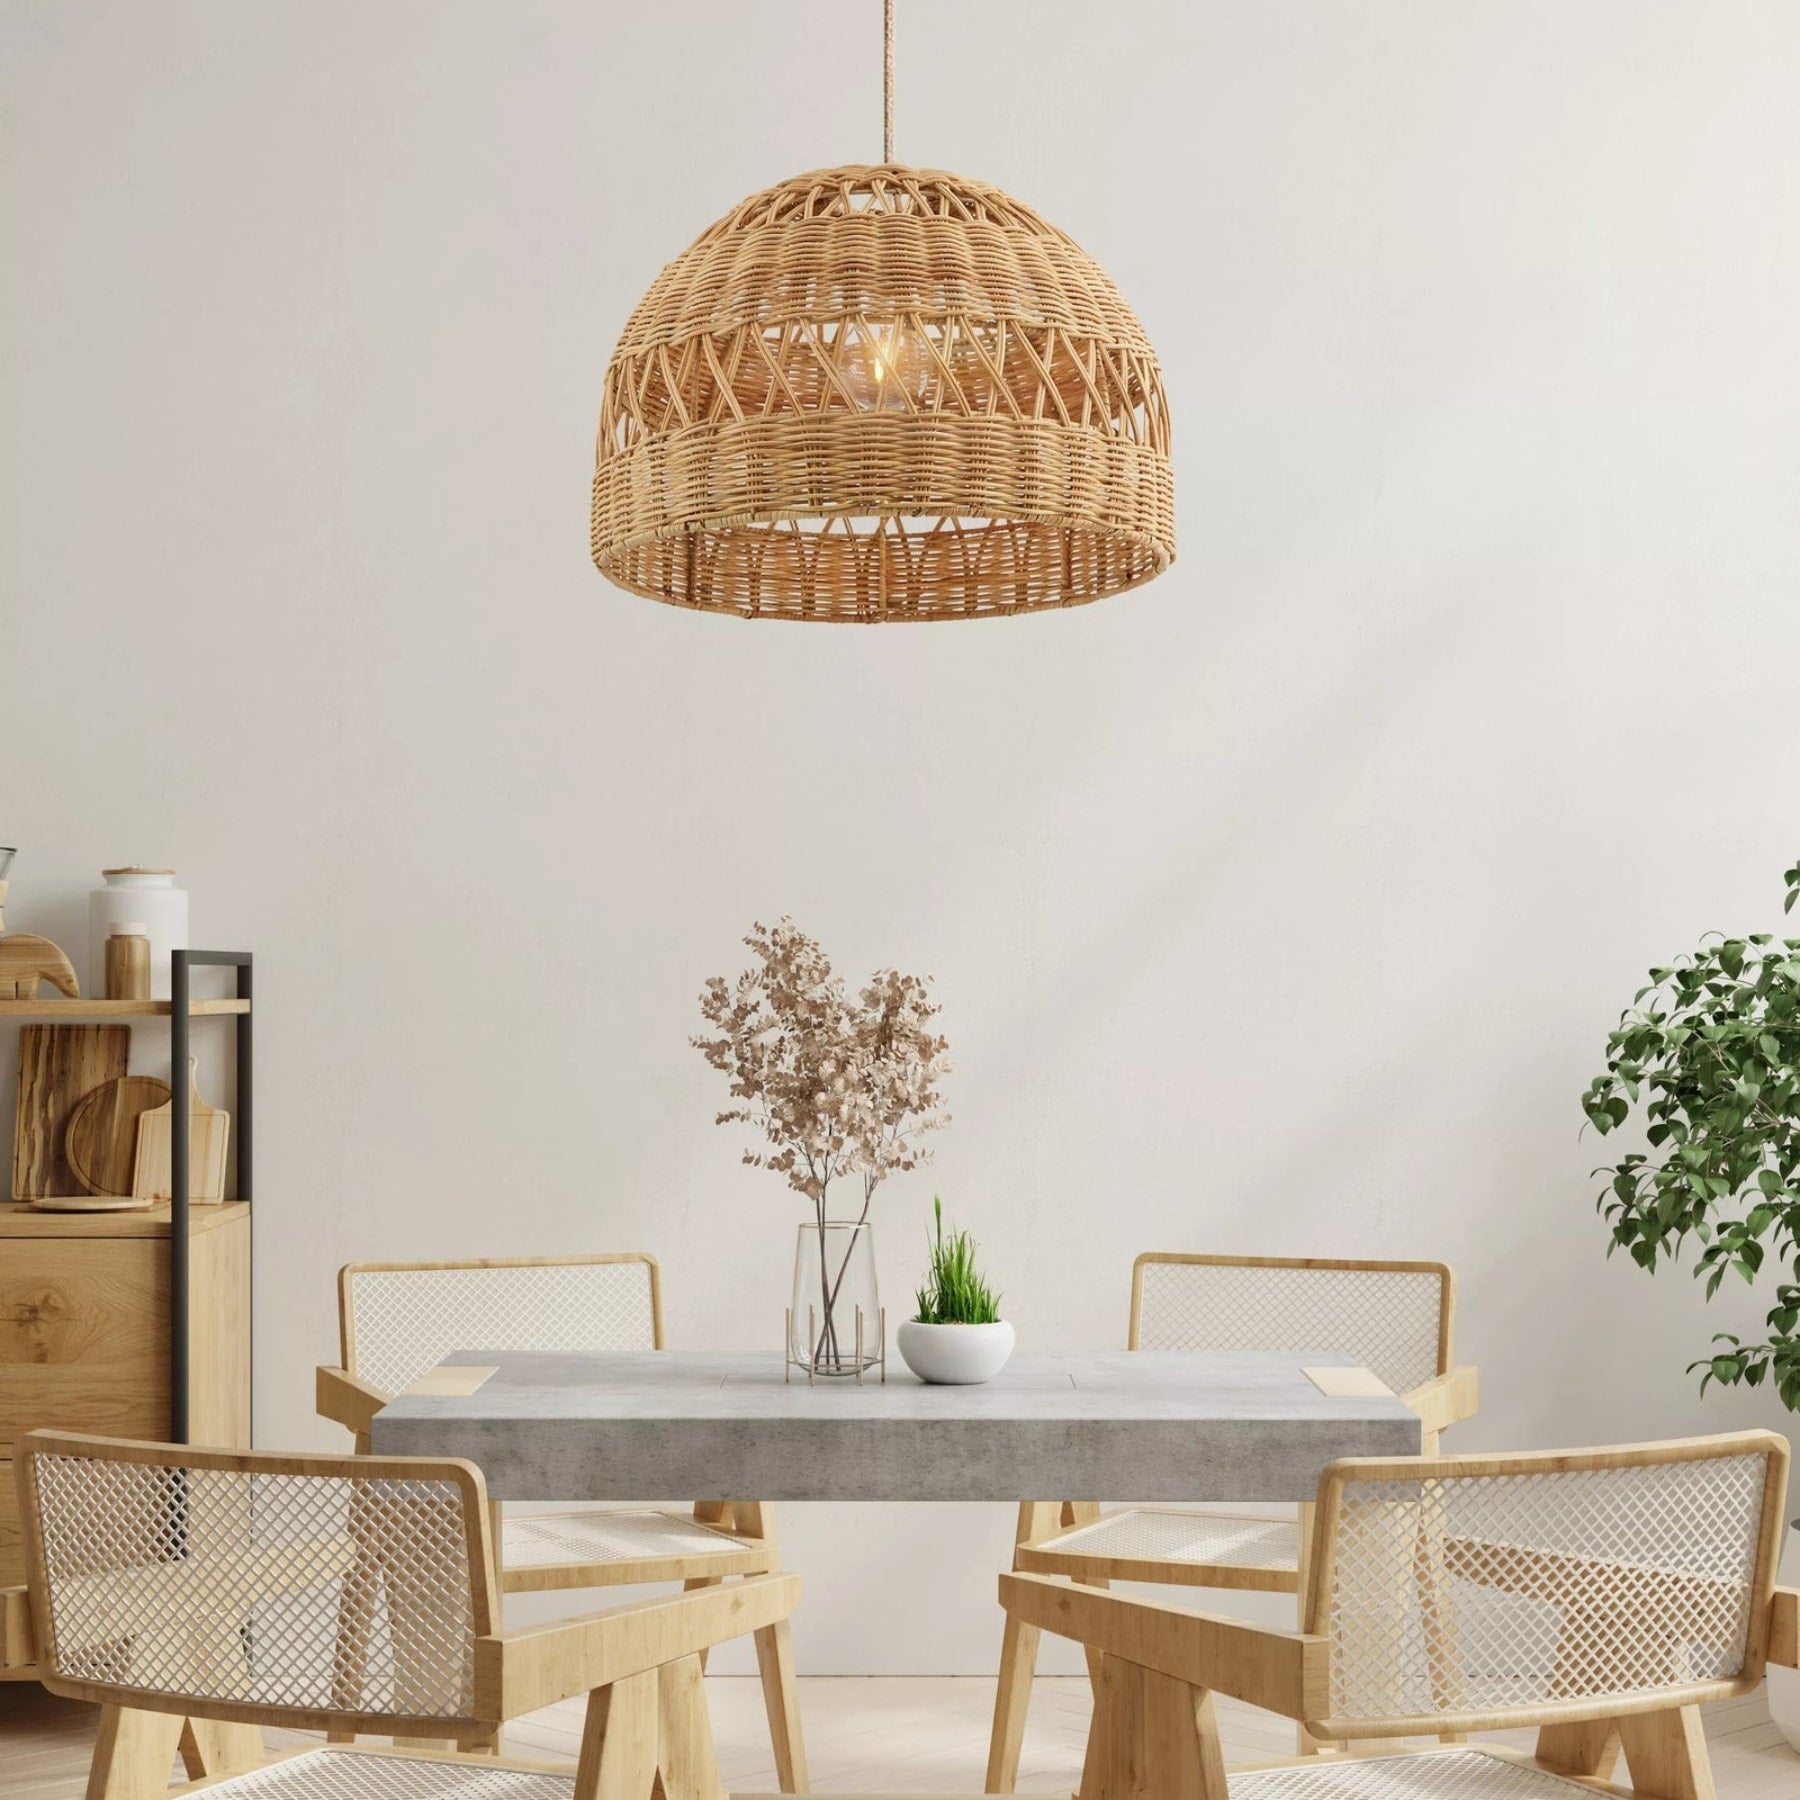 the earthy tones and natural materials of rattan pendant lights